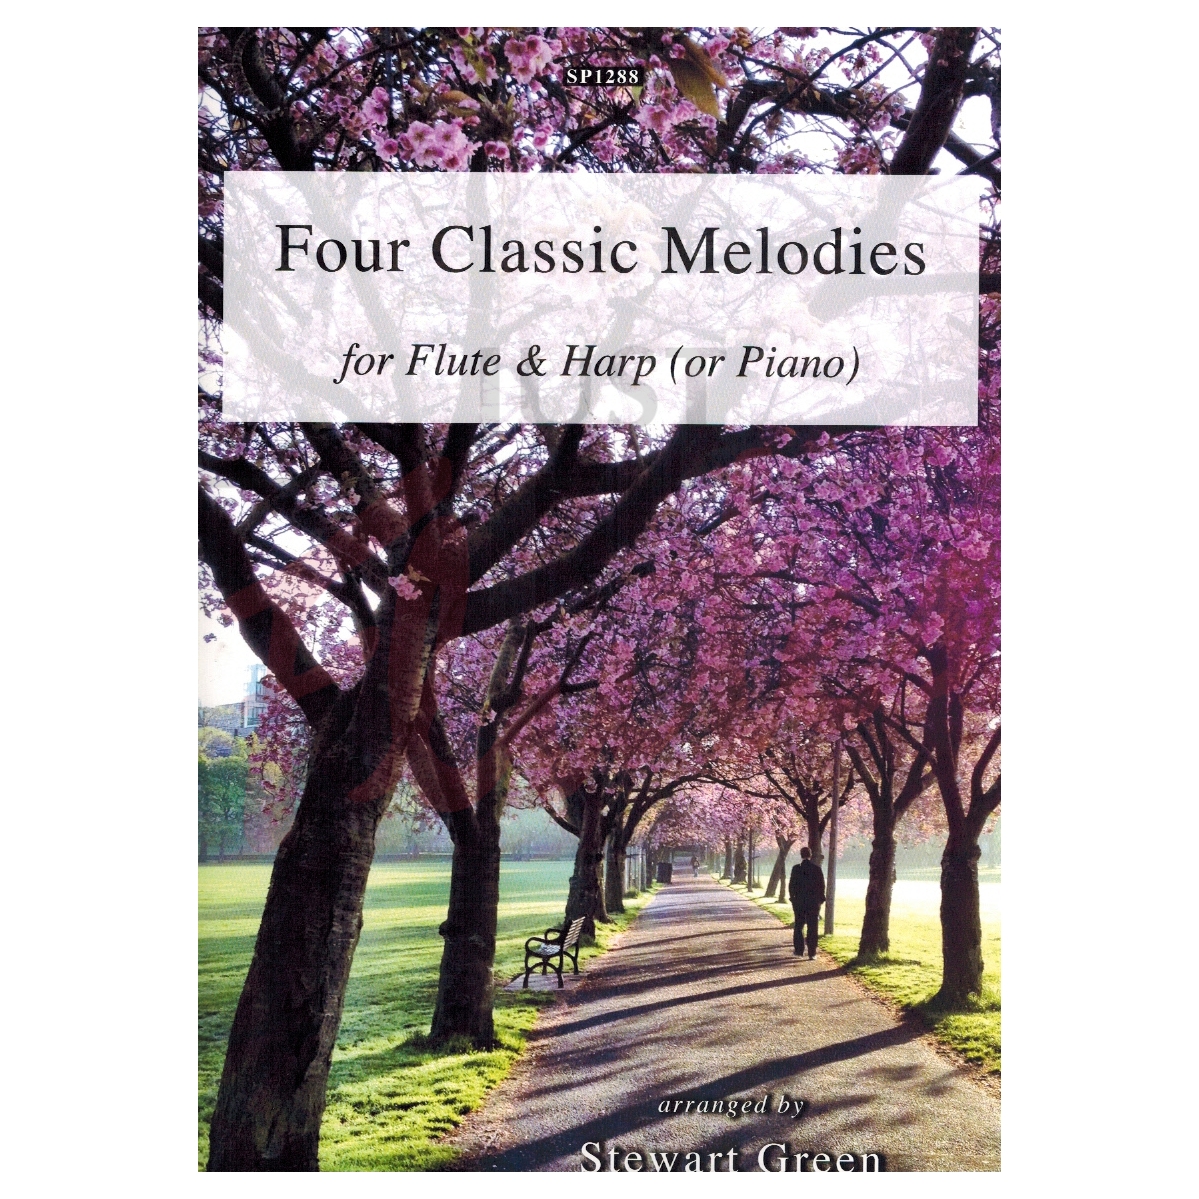 Four Classic Melodies